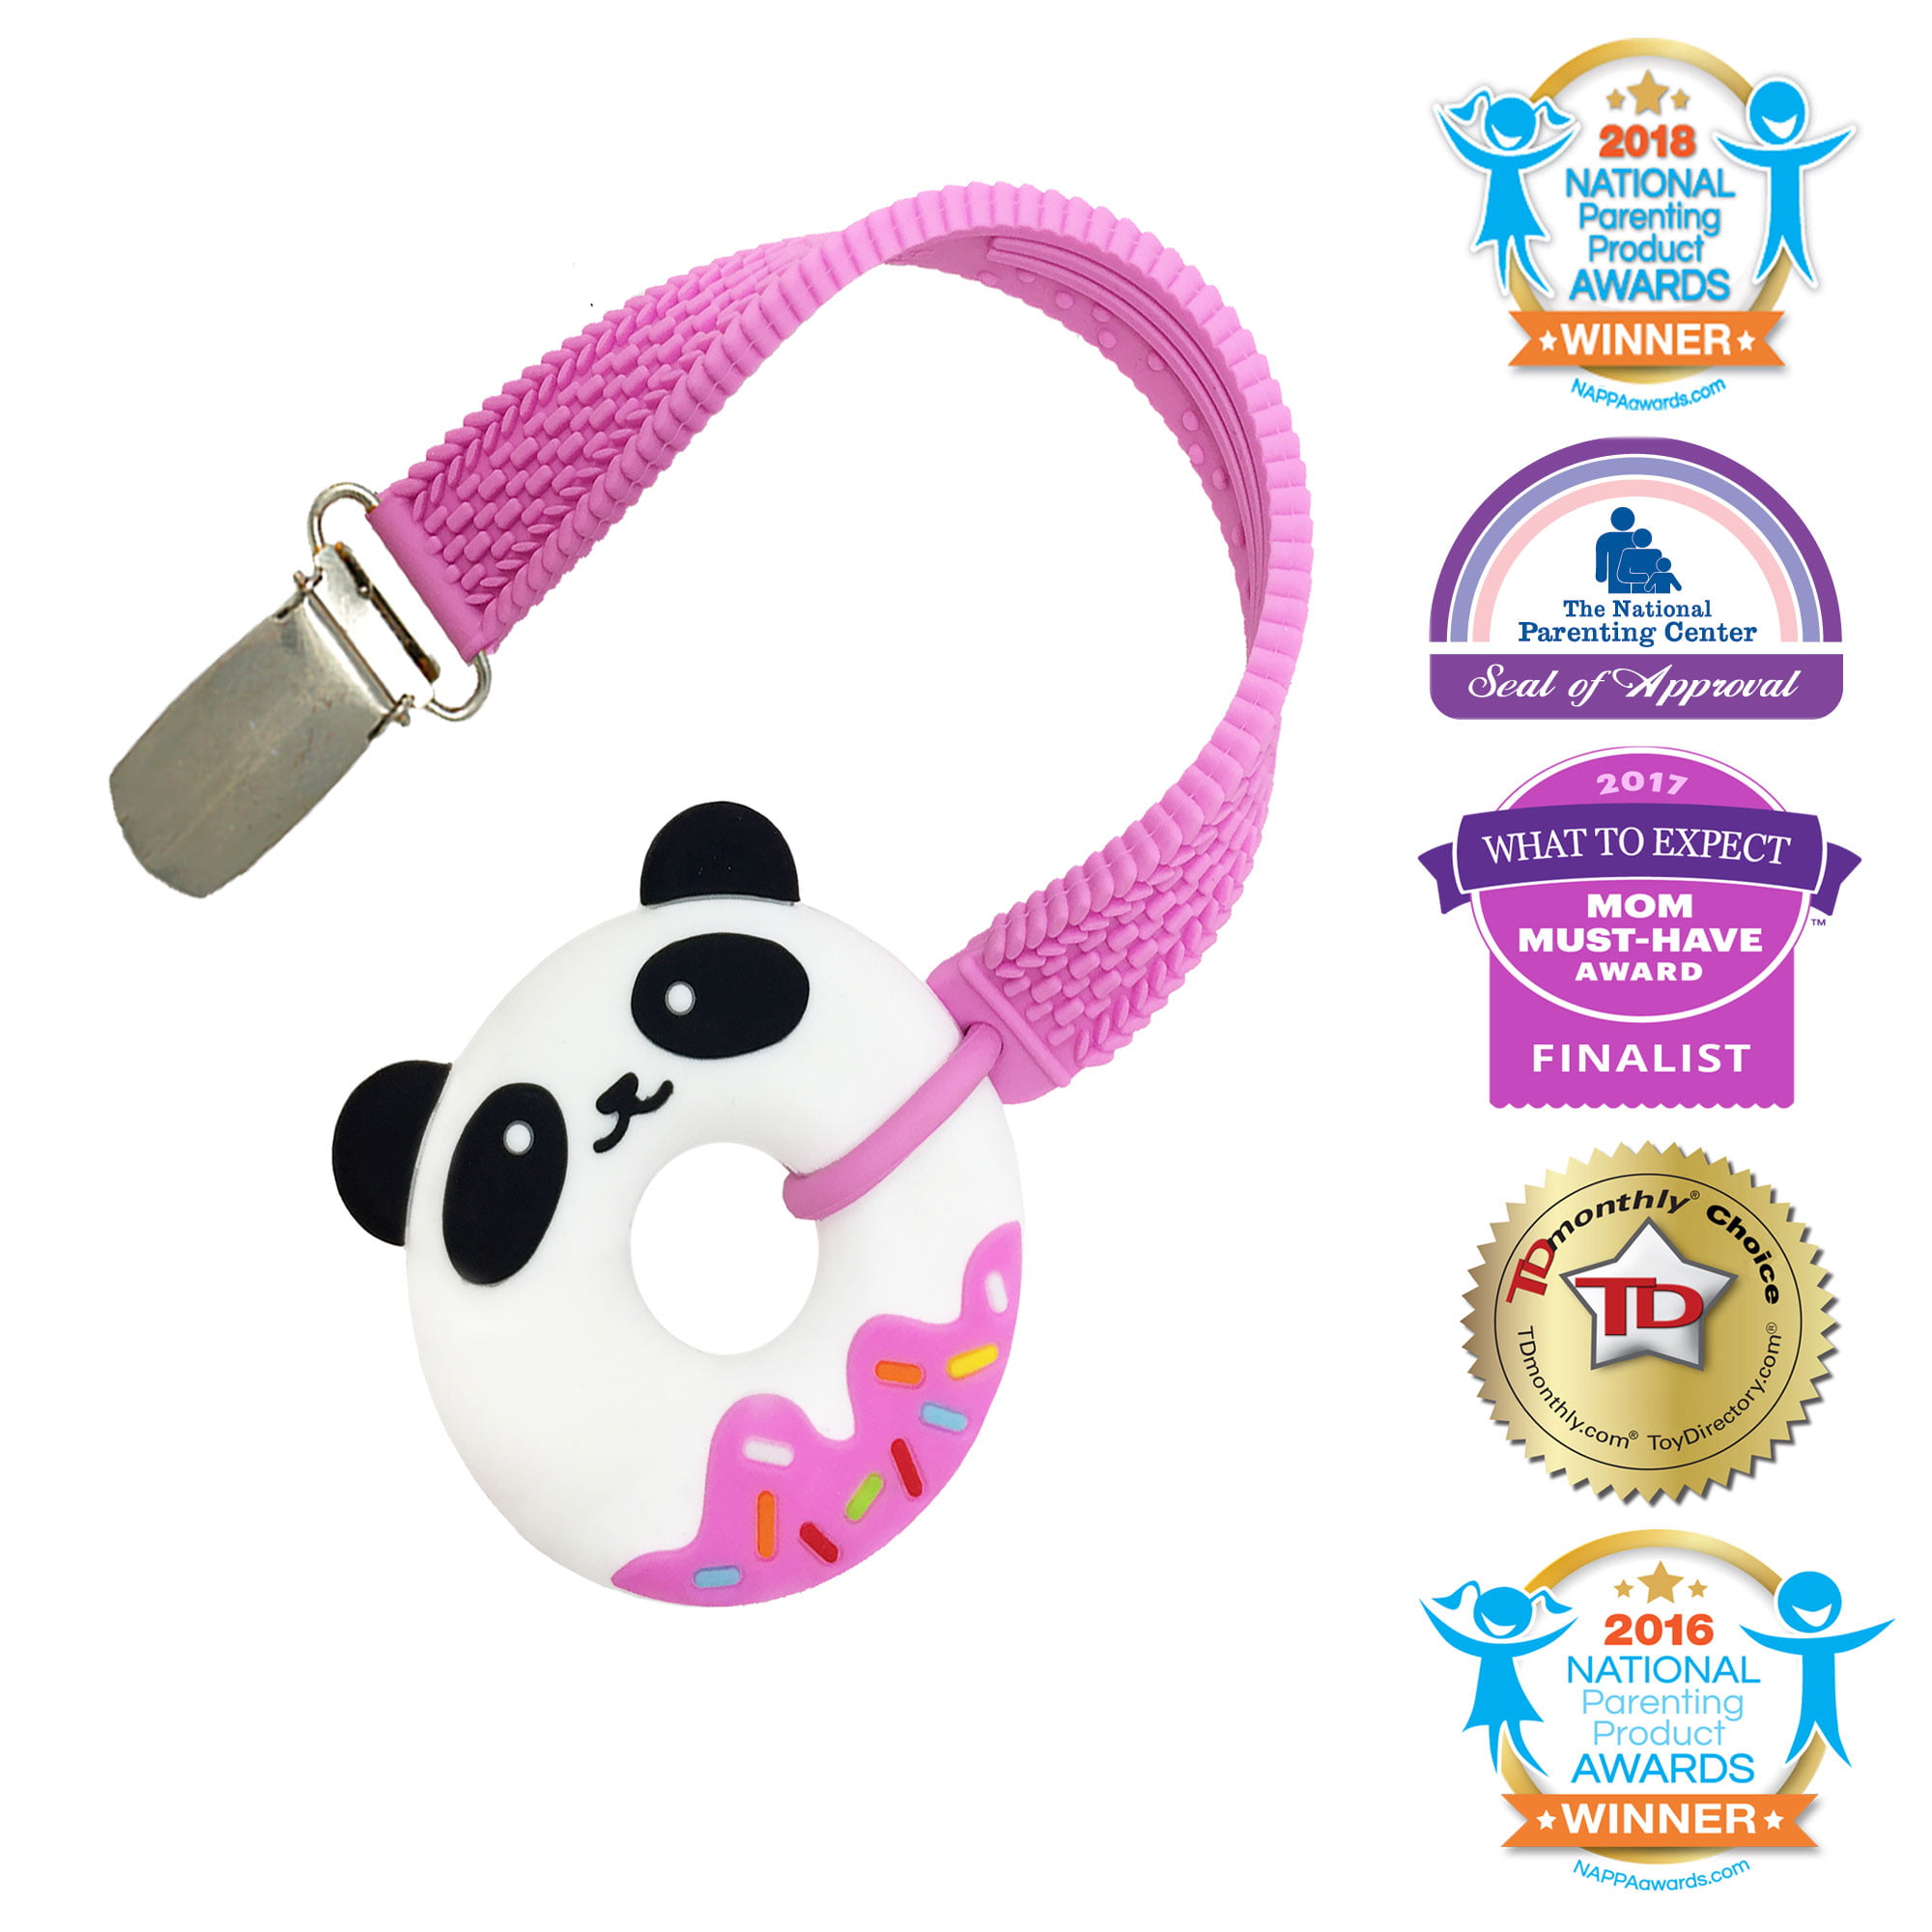 BABY Silicone TEETHER SAFE BPA Phthalates PVC FREE Chew Teething Toy CHEWMOTE 